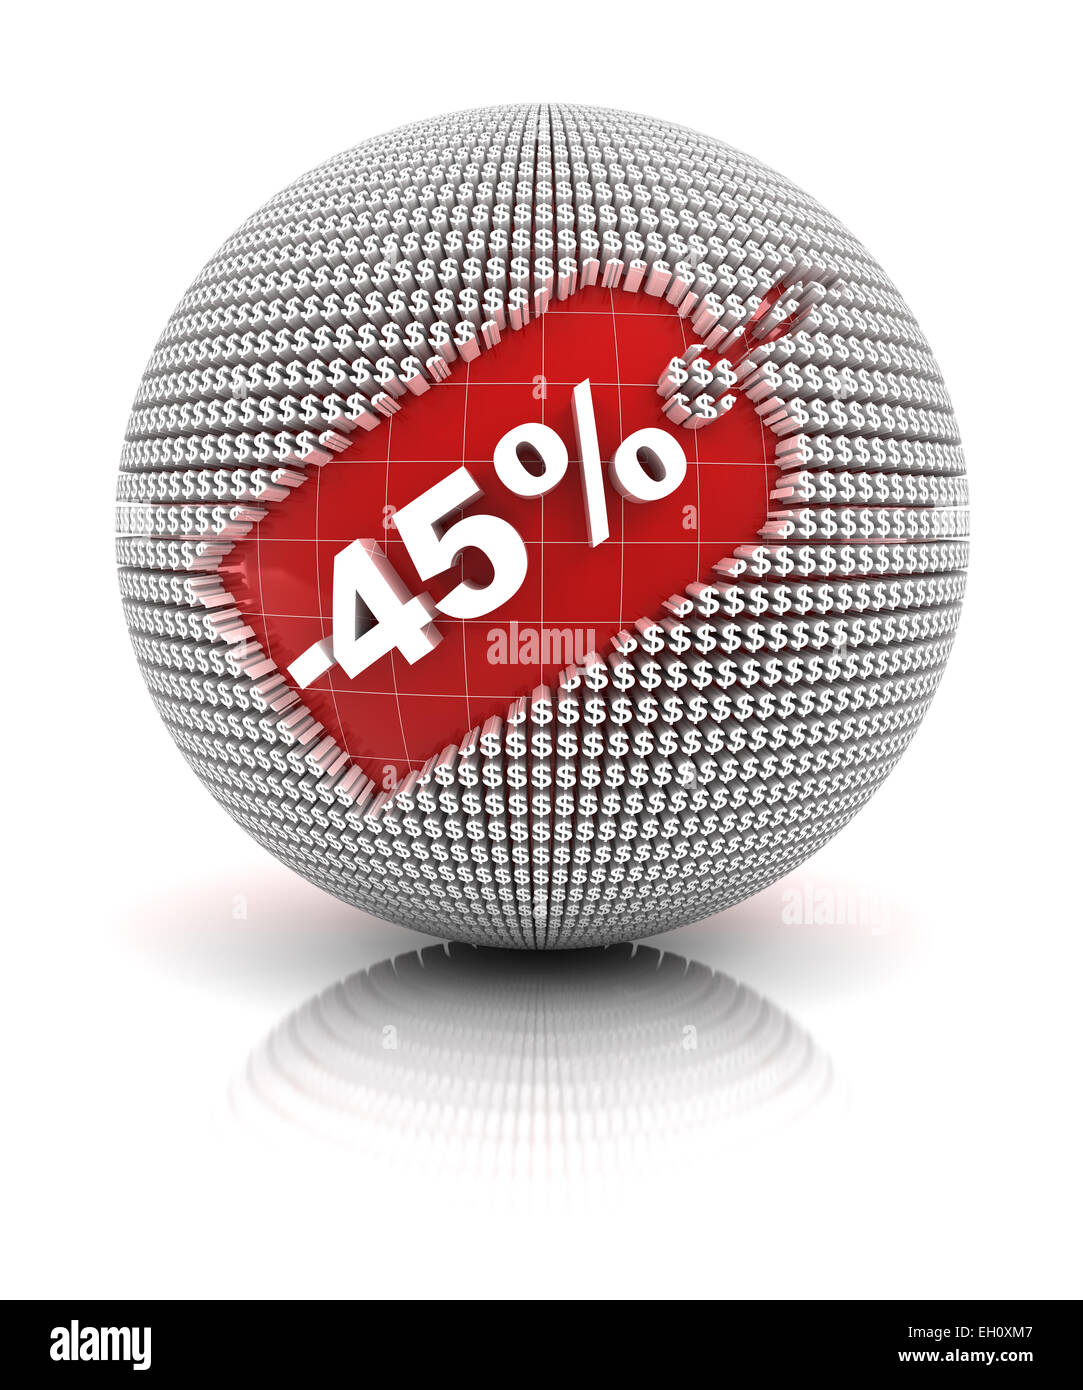 45 percent off sale tag on a sphere Stock Photo